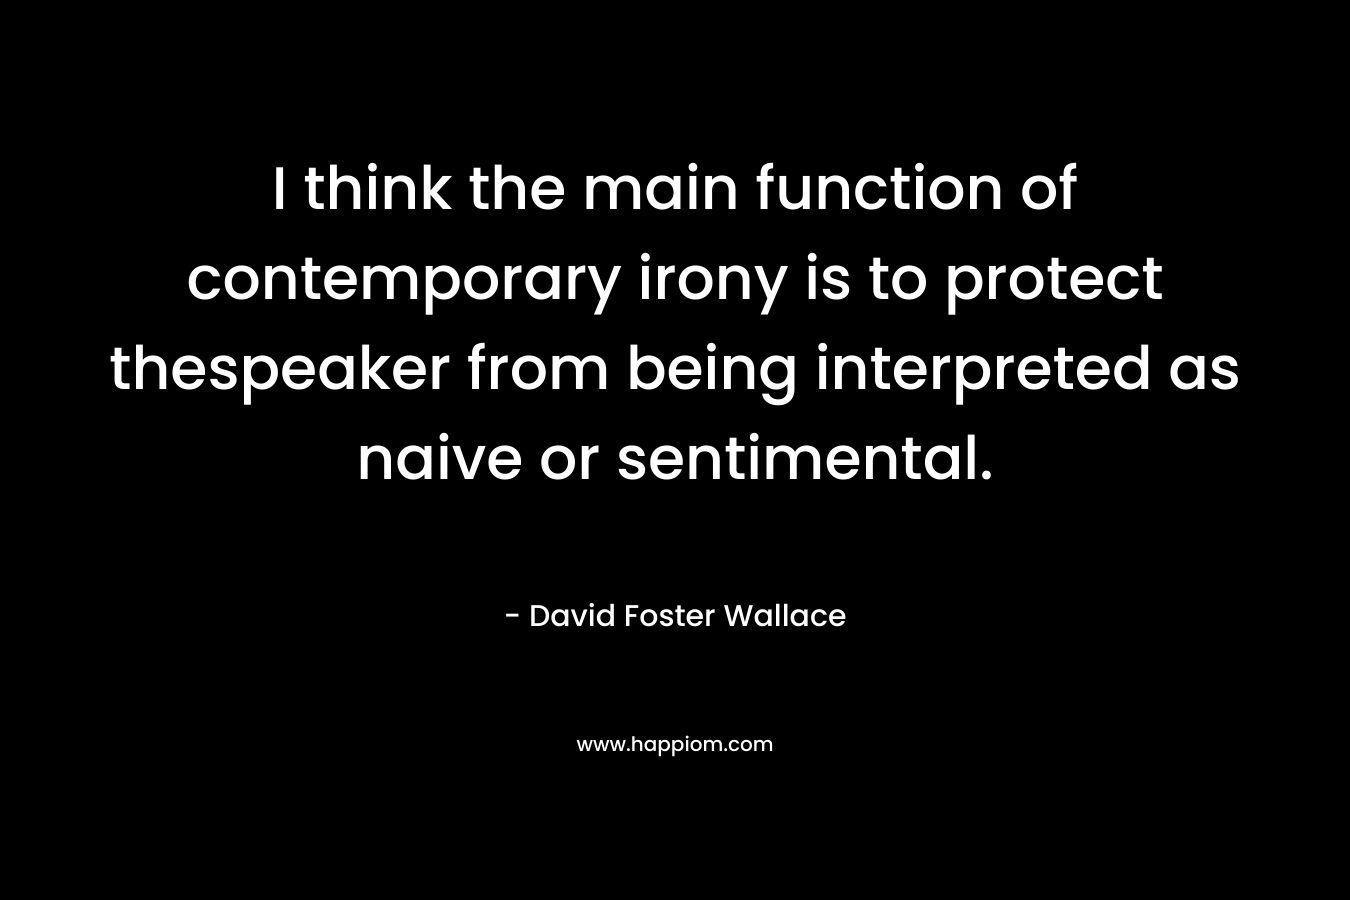 I think the main function of contemporary irony is to protect thespeaker from being interpreted as naive or sentimental. – David Foster Wallace